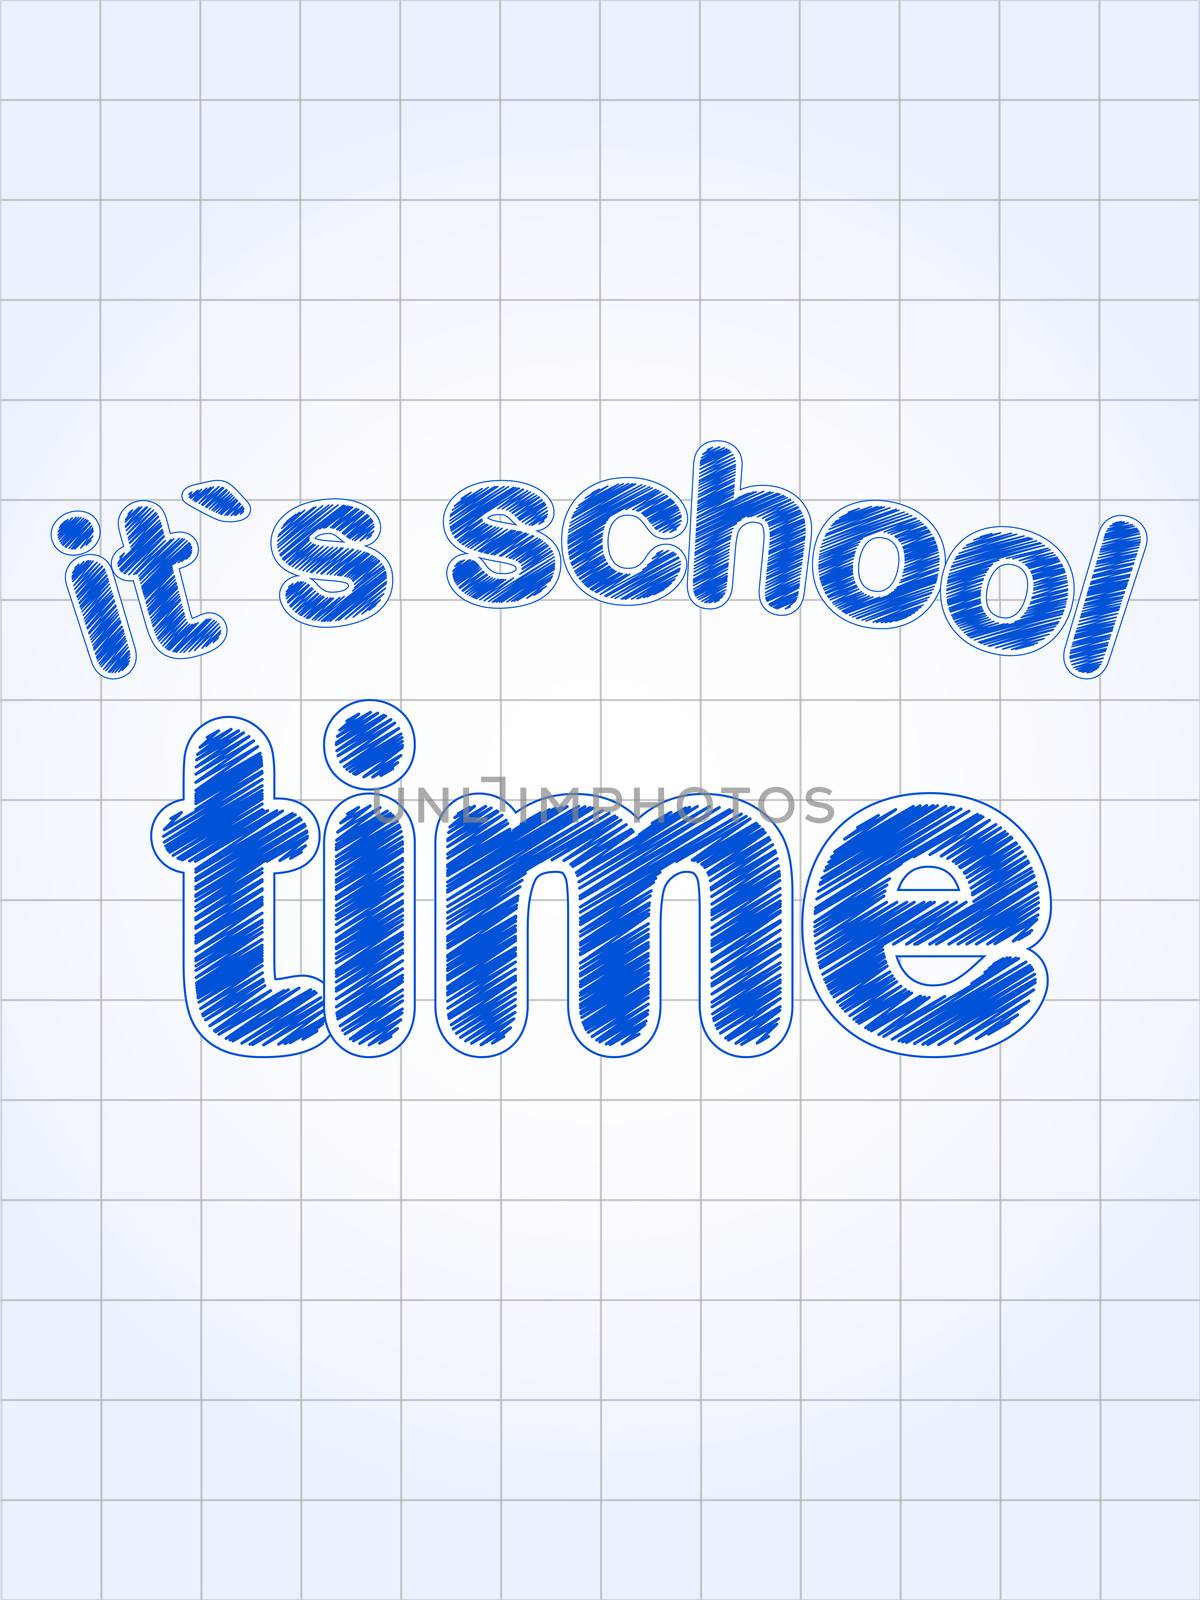 it's school time blue letters over squared sheet of paper